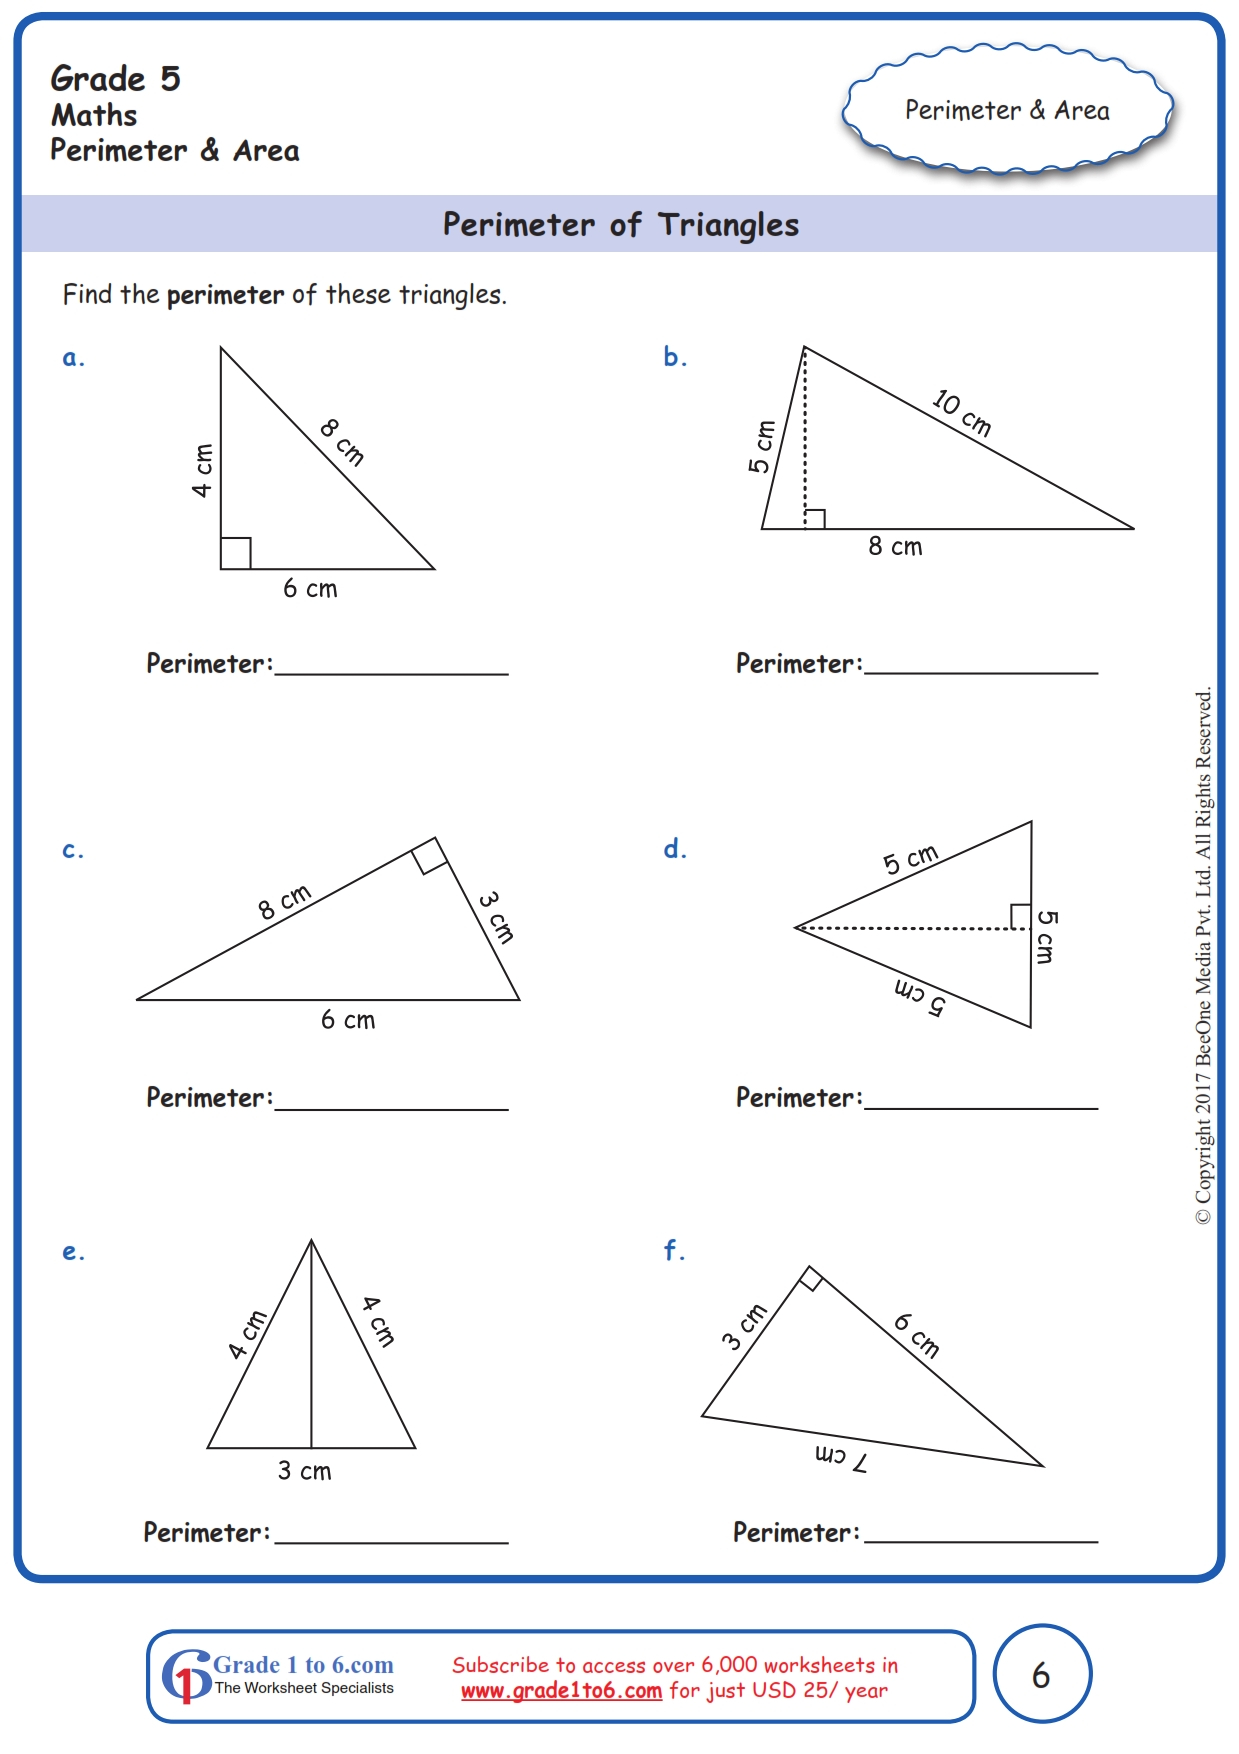 Perimeter Of Triangle Worksheets Grade 5 Www grade1to6